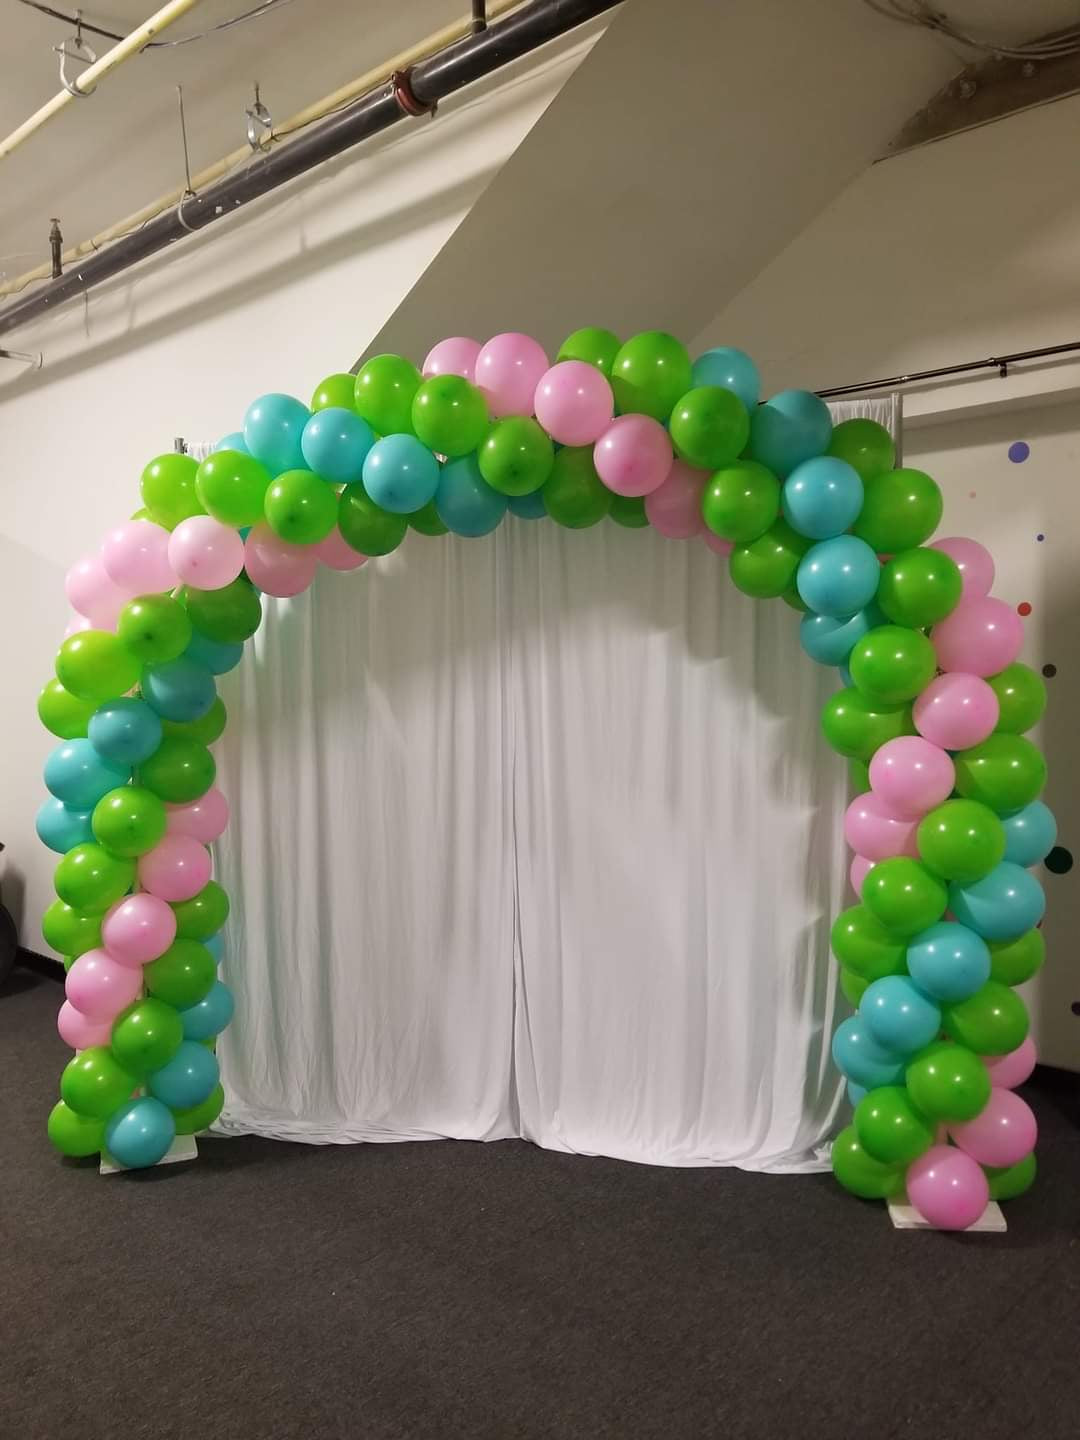 Balloon arches and garlands